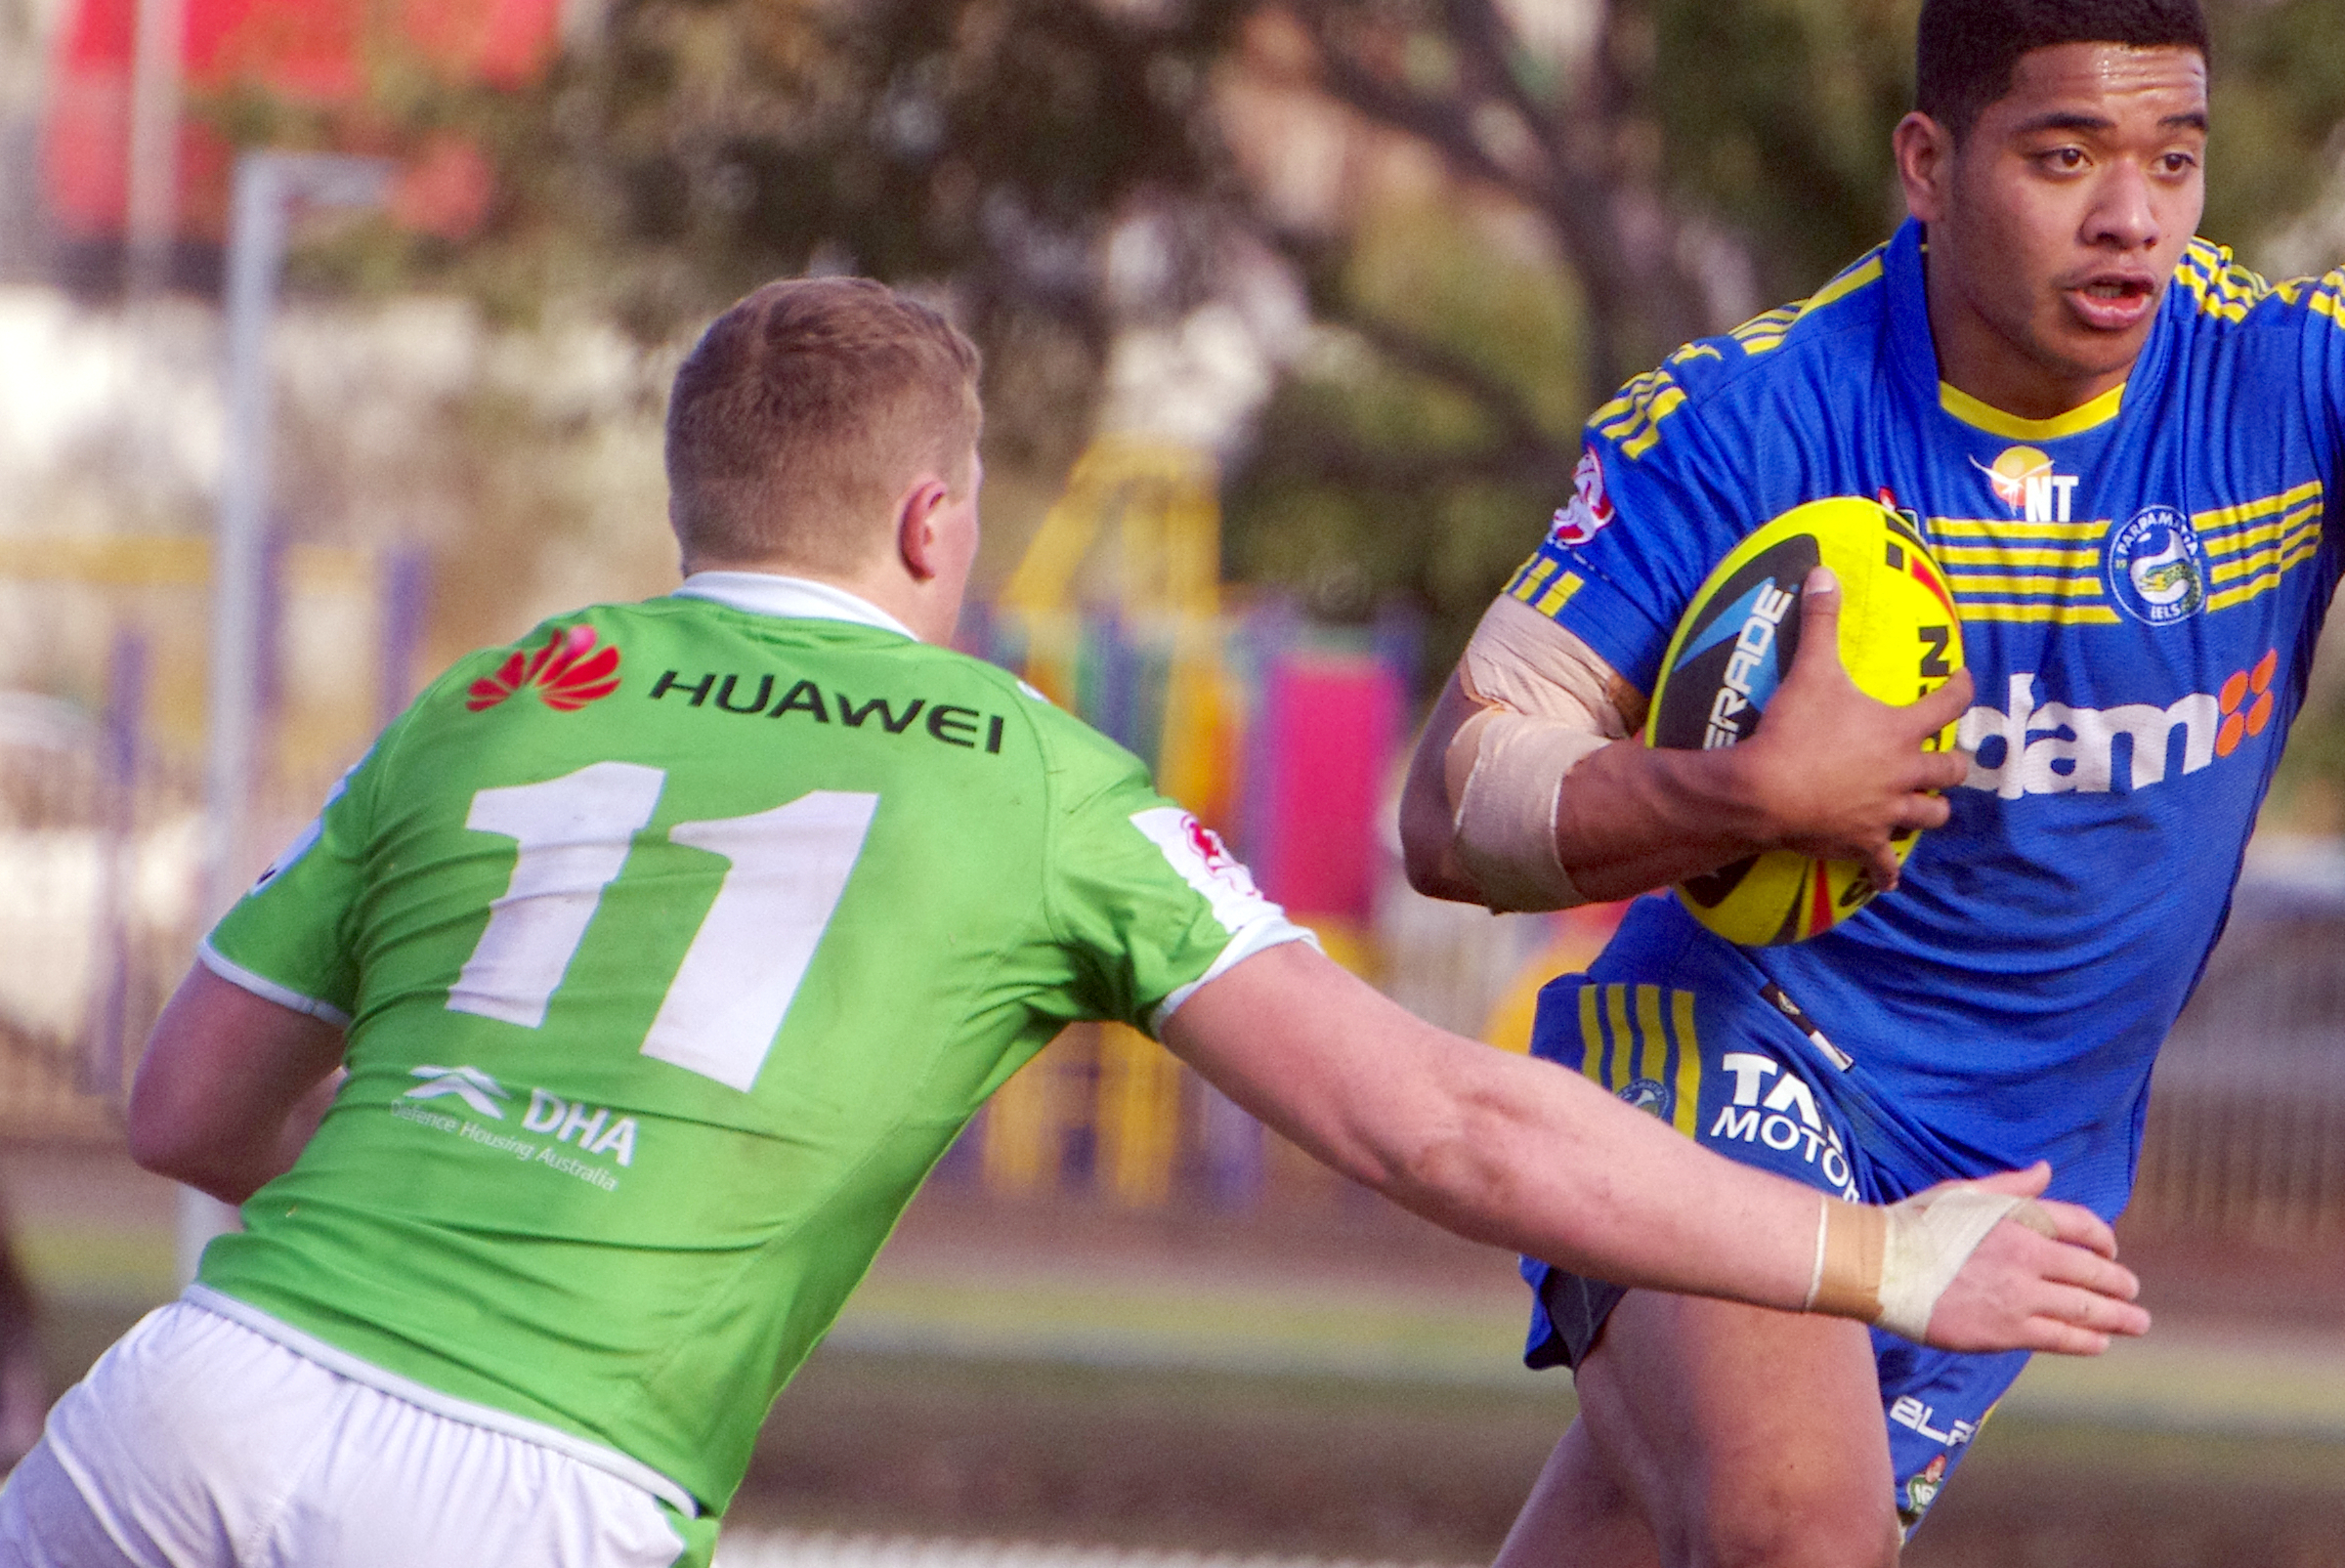 HUAWEI sponsor a rugby league team that plays out of the capital city